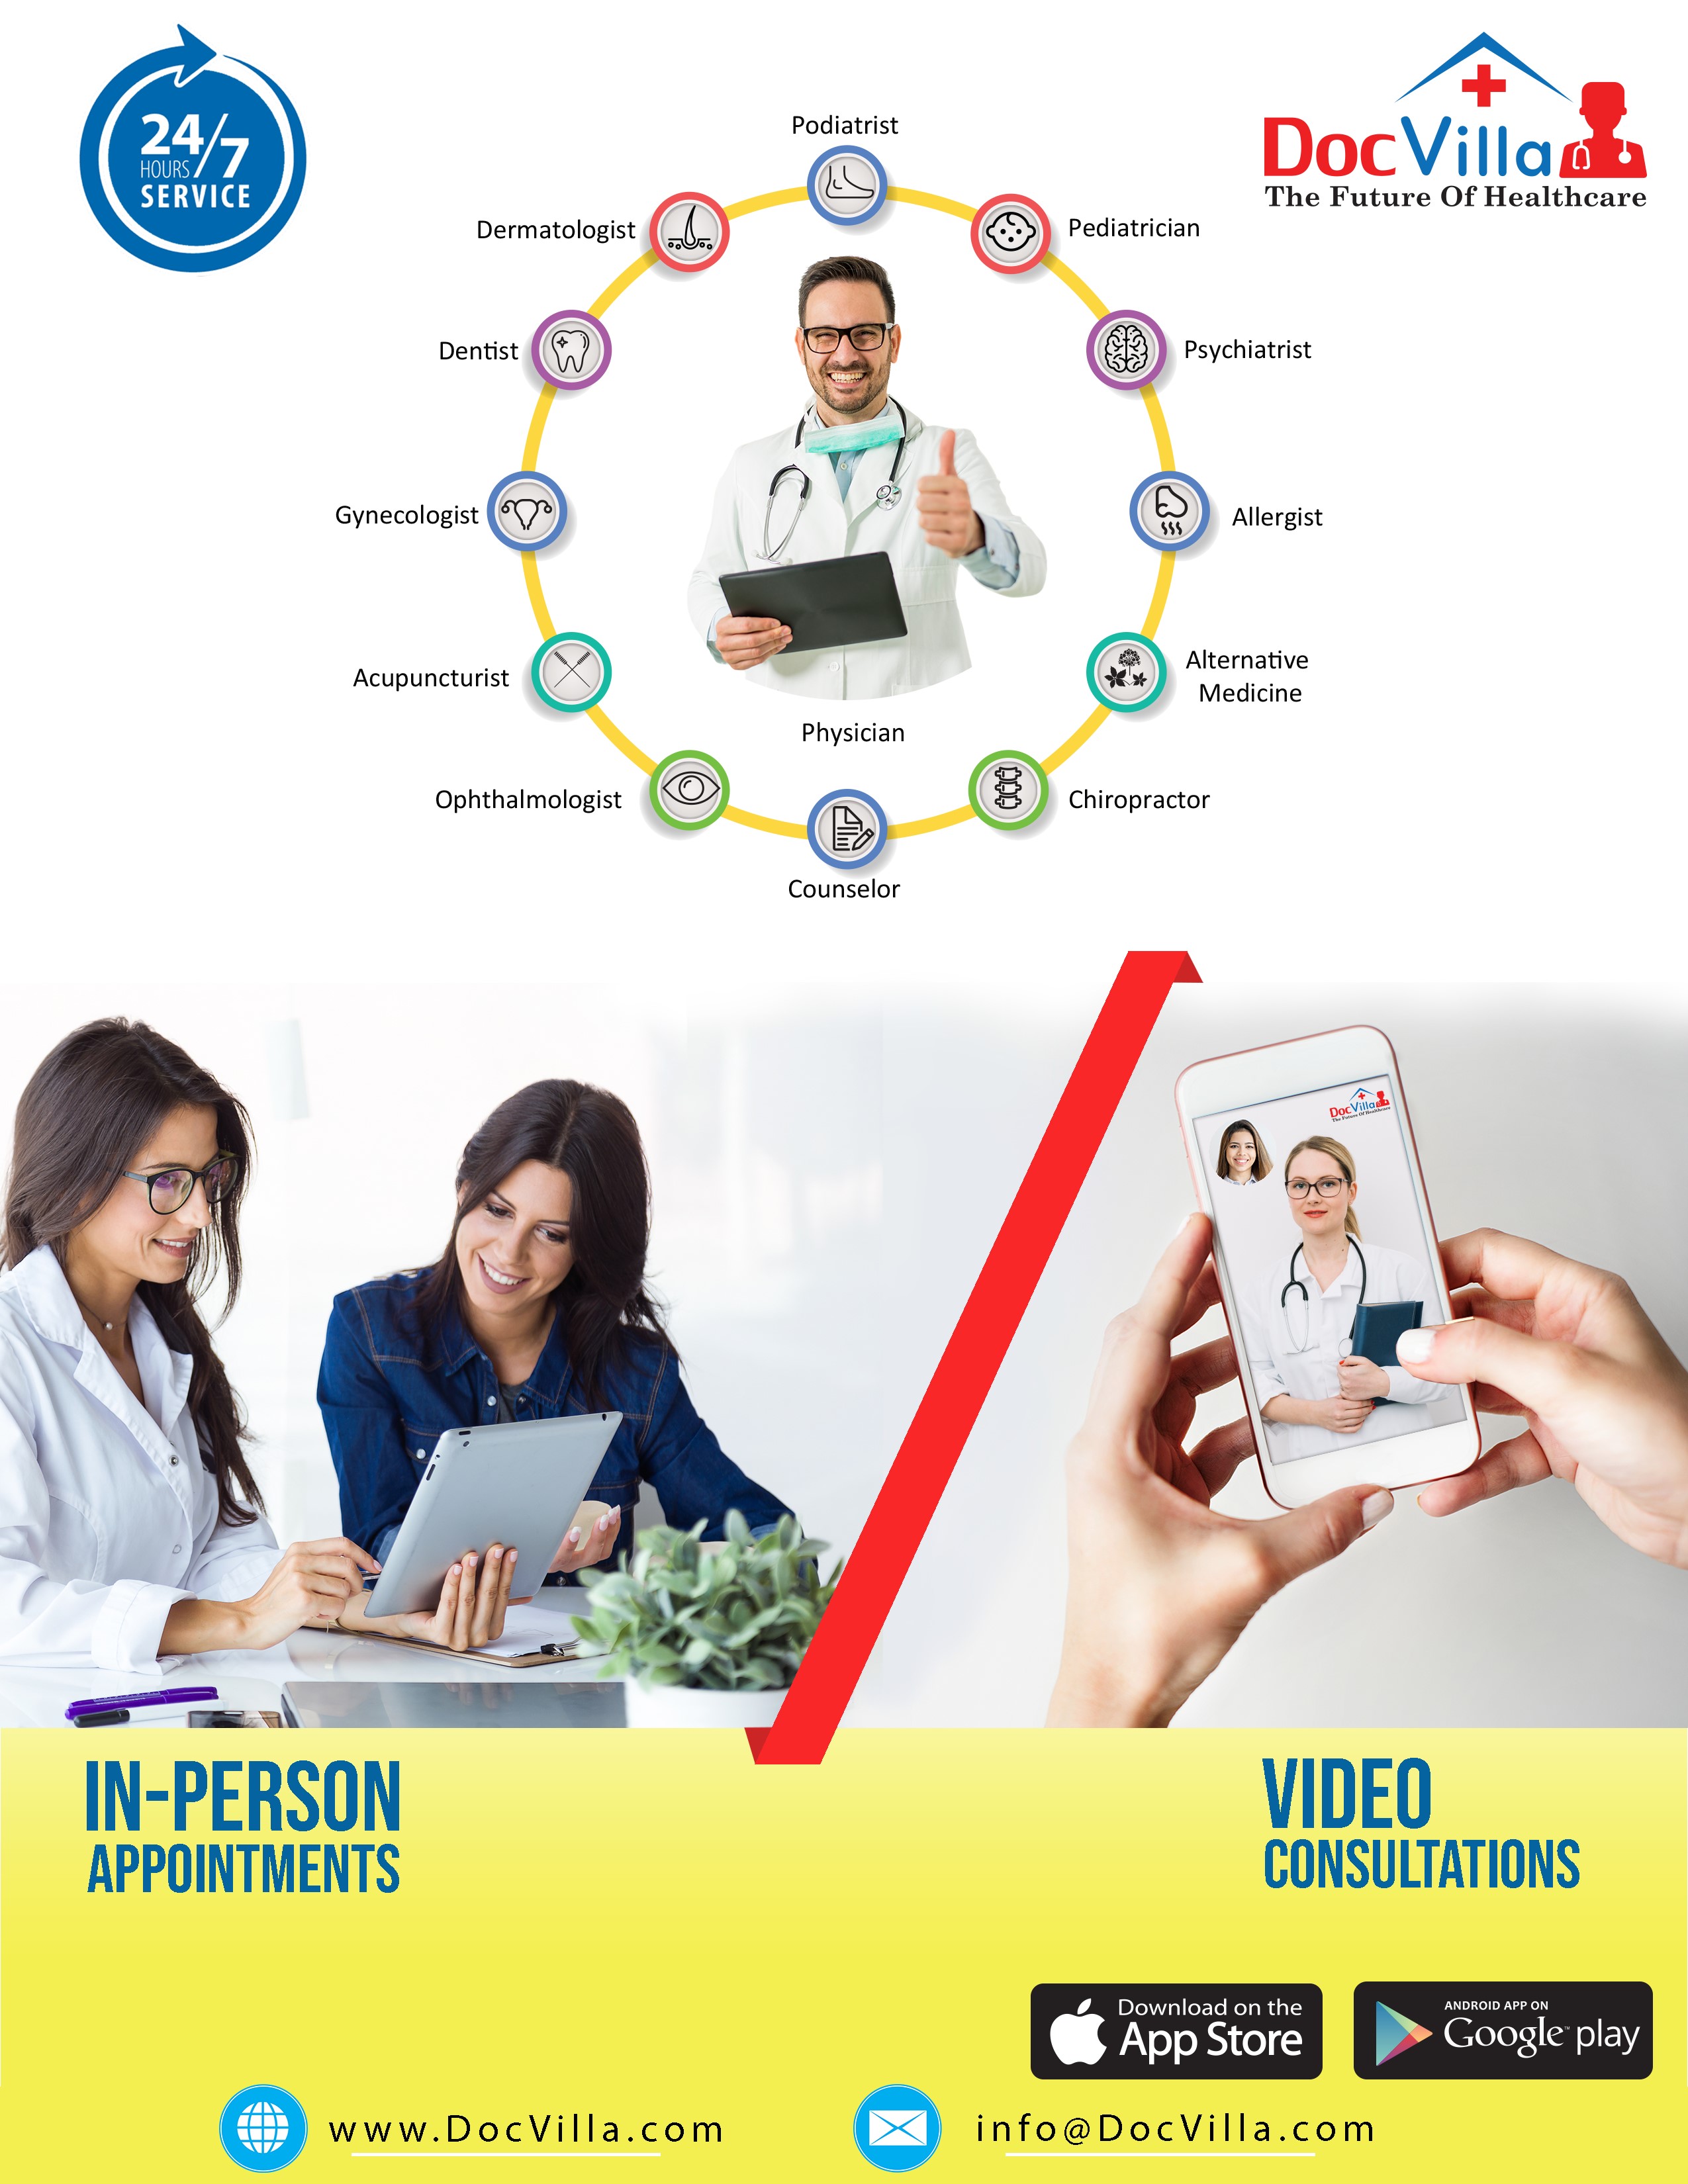 DocVilla - Schedule Telemedicine and In-Person appointments